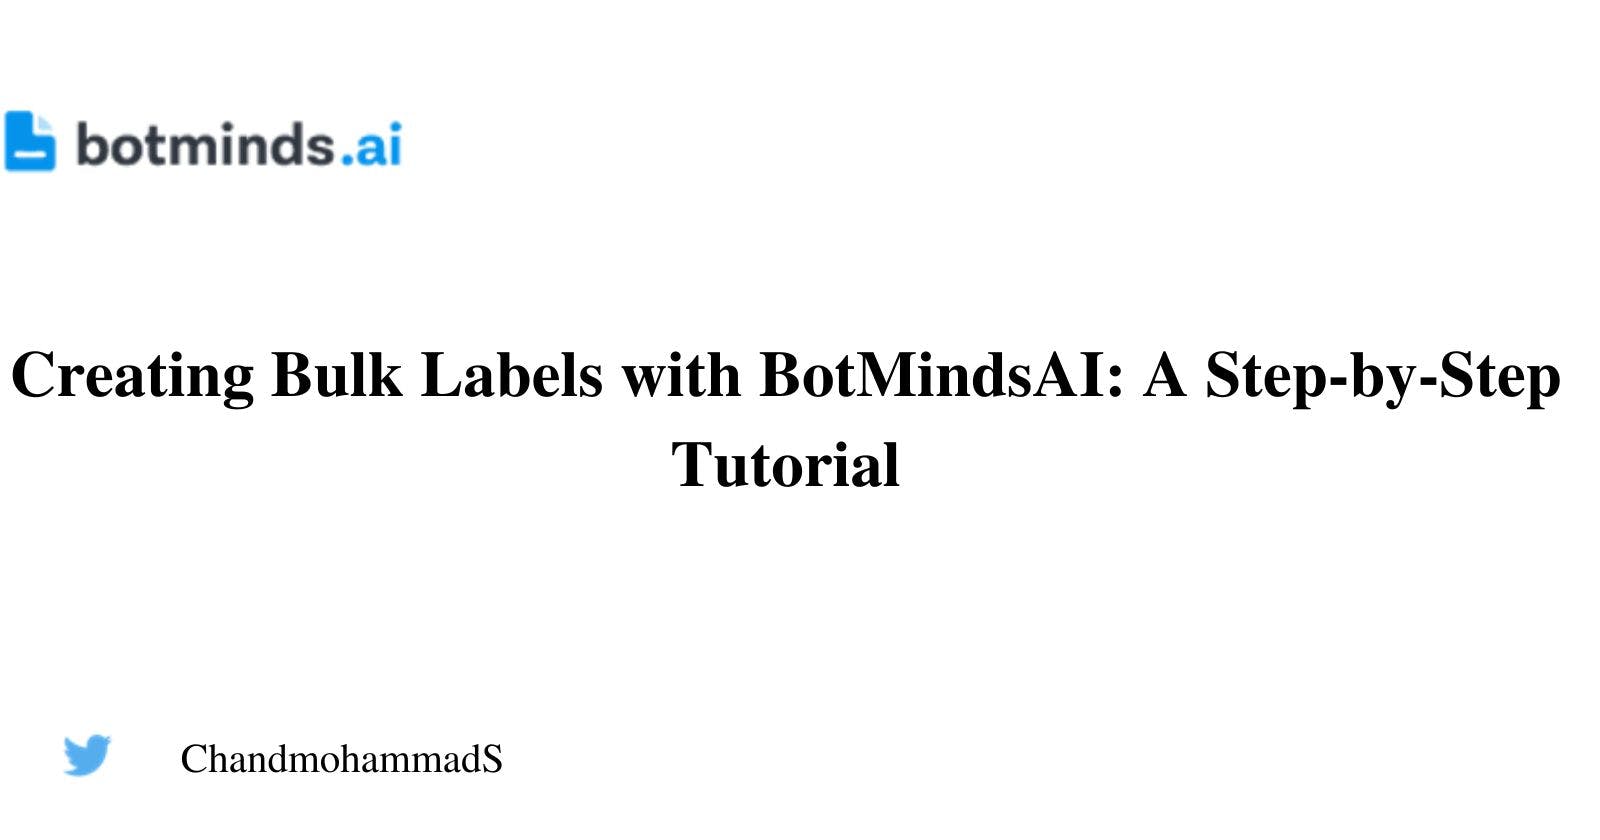 Creating Bulk Labels with BotMindsAI: A Step-by-Step Tutorial